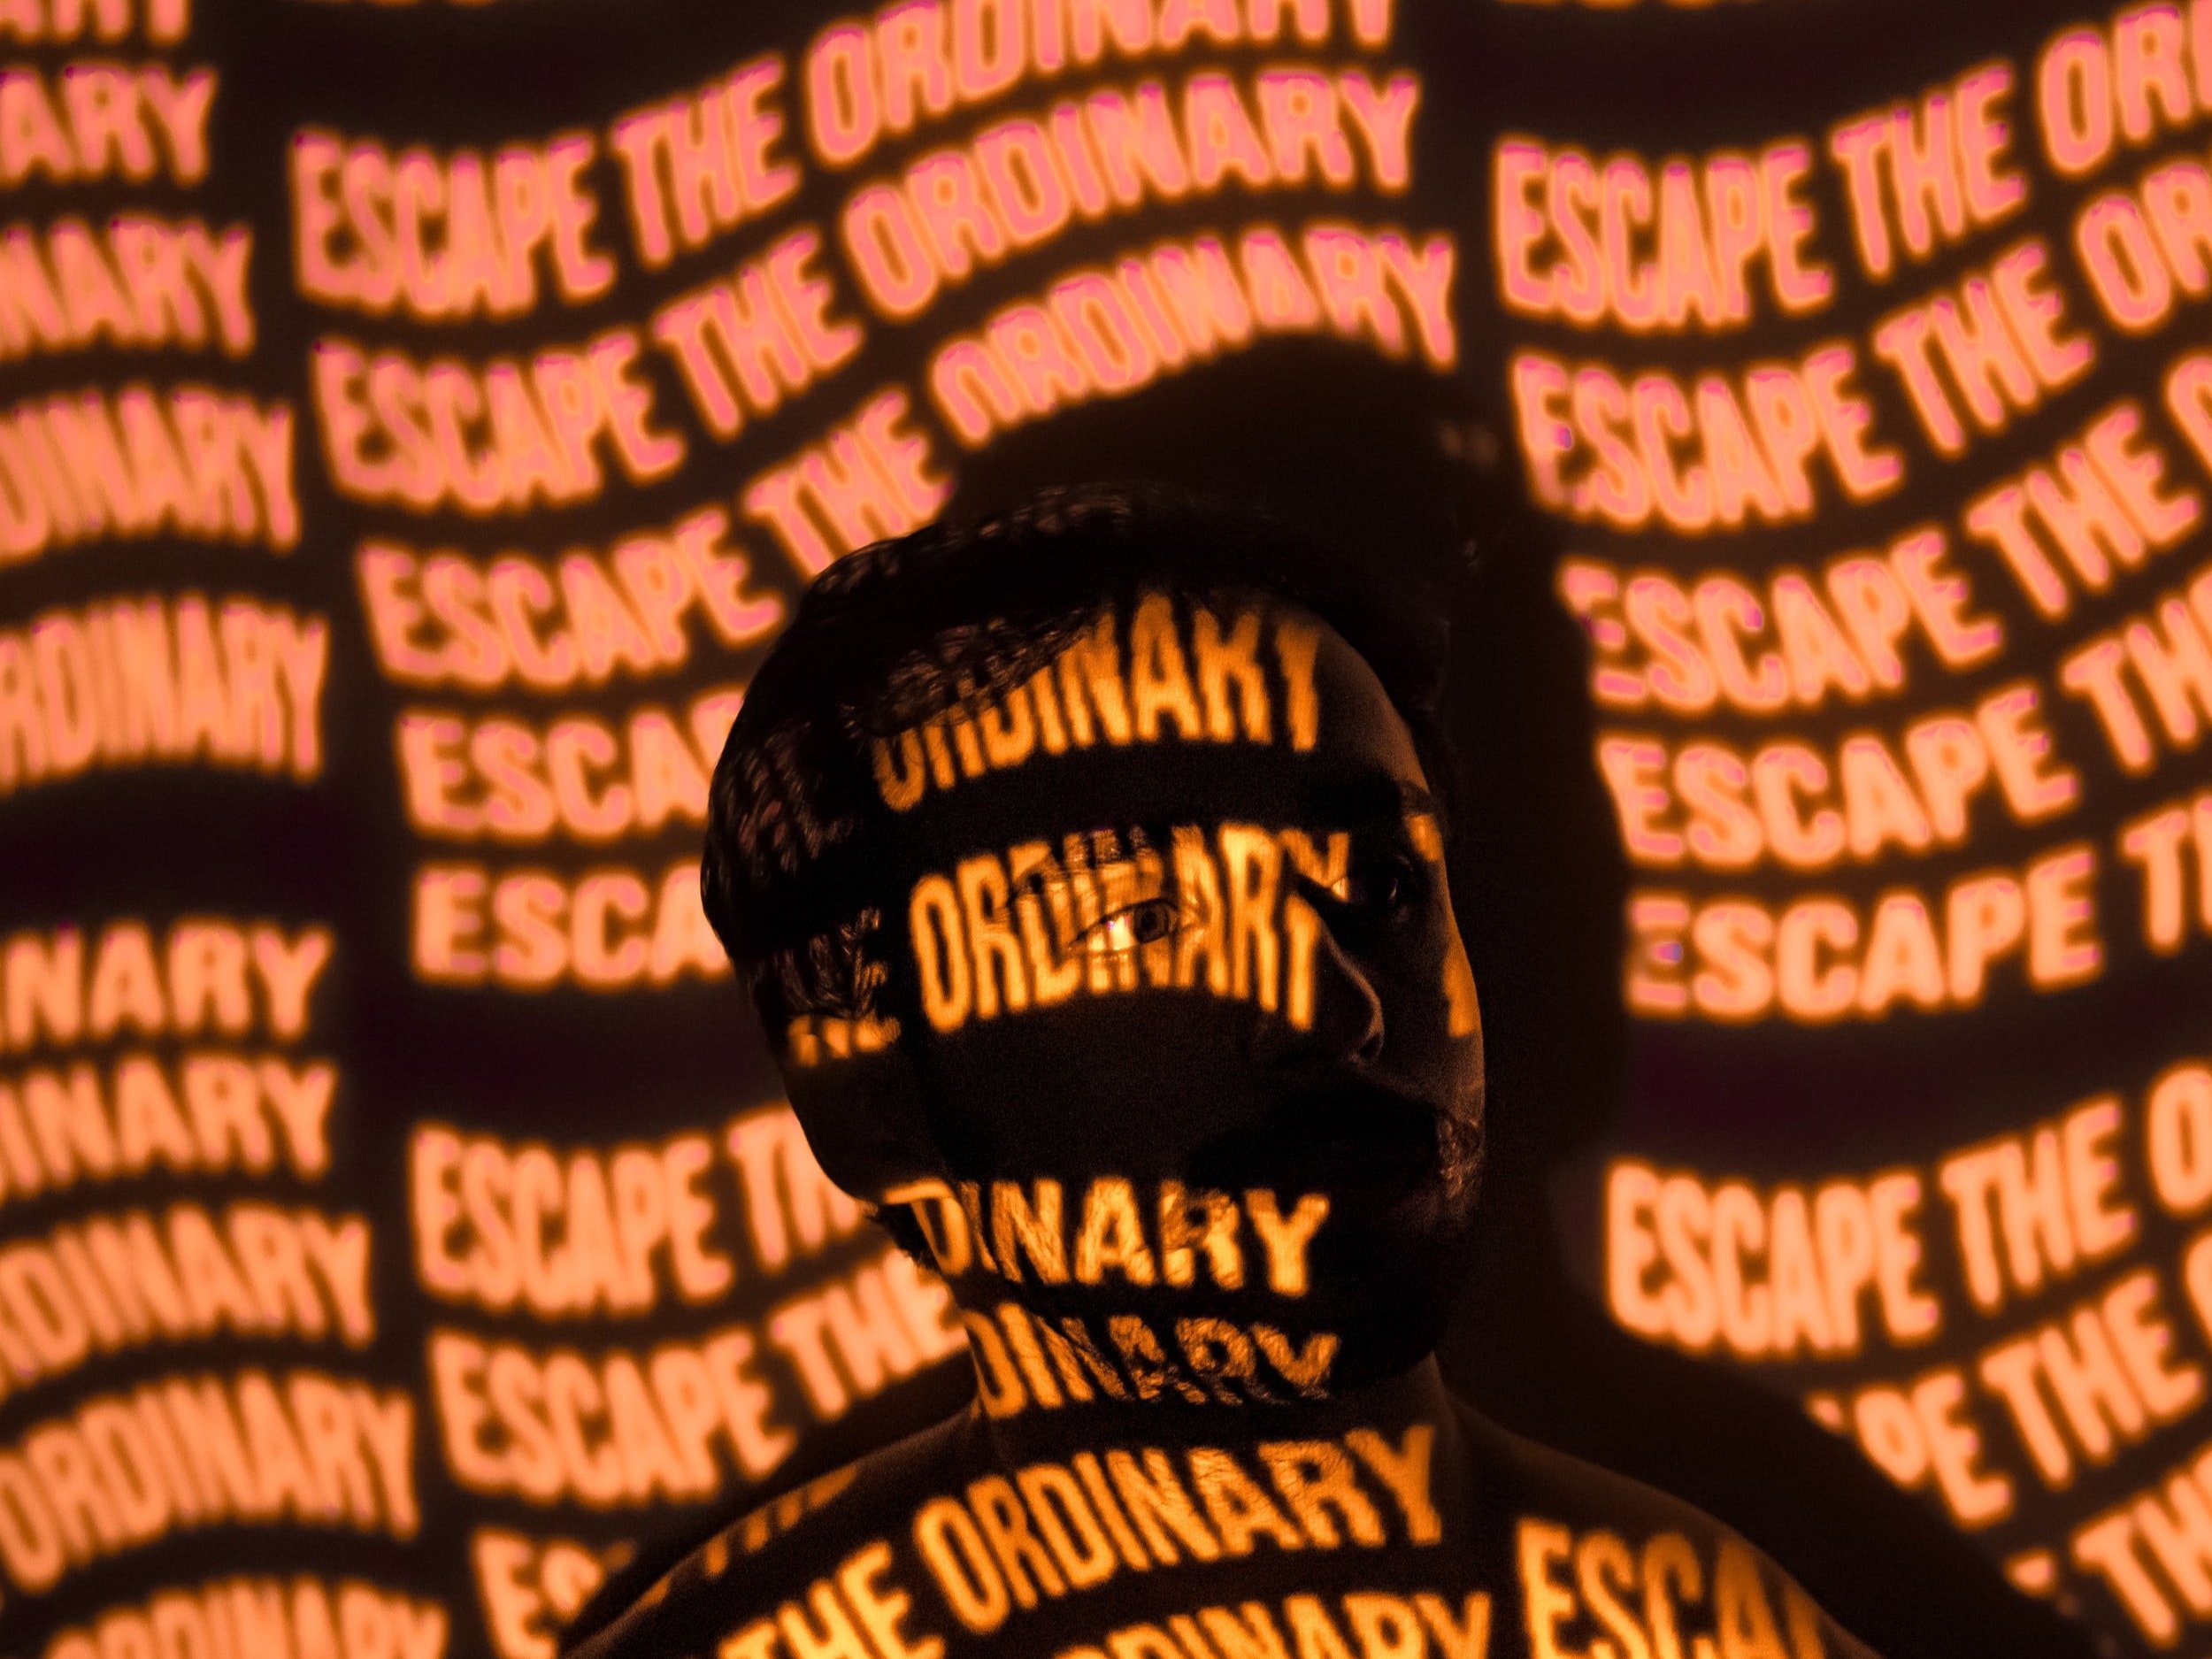 a man in the dark with the words "Escape the Ordinary" projected onto him and the wall